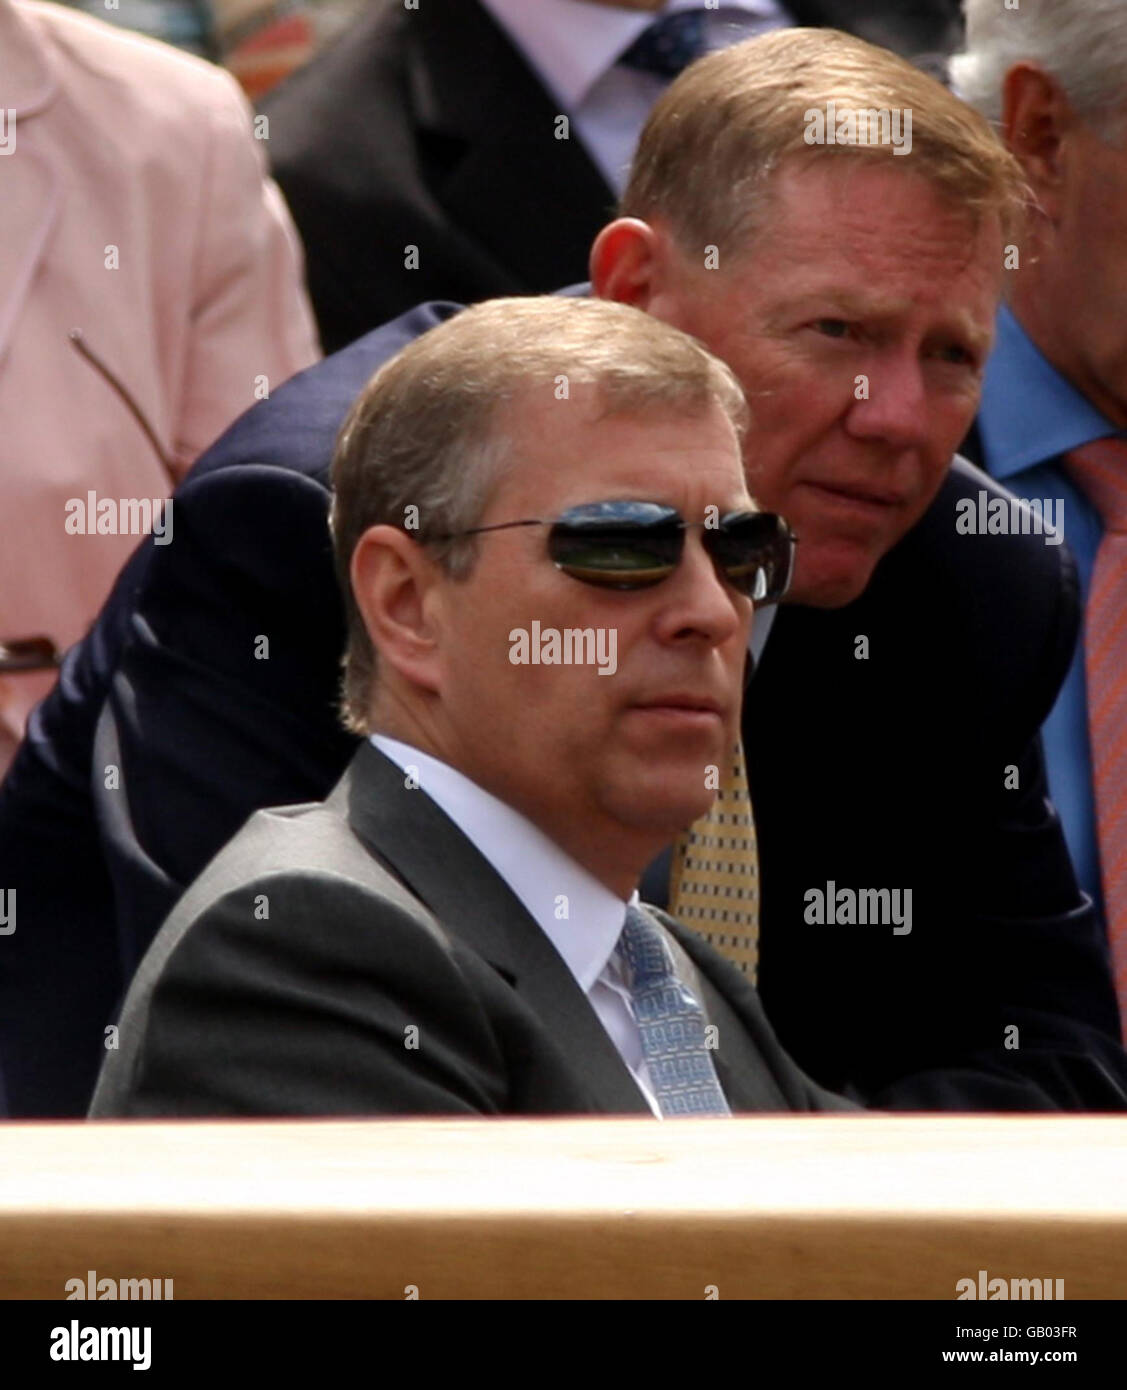 Prince Andrew, The Duke of York takes his seat for the mens semi final between Switzerland's Roger Federer and Russia's Marat Safin during the Wimbledon Championships 2008 at the All England Tennis Club in Wimbledon. Stock Photo